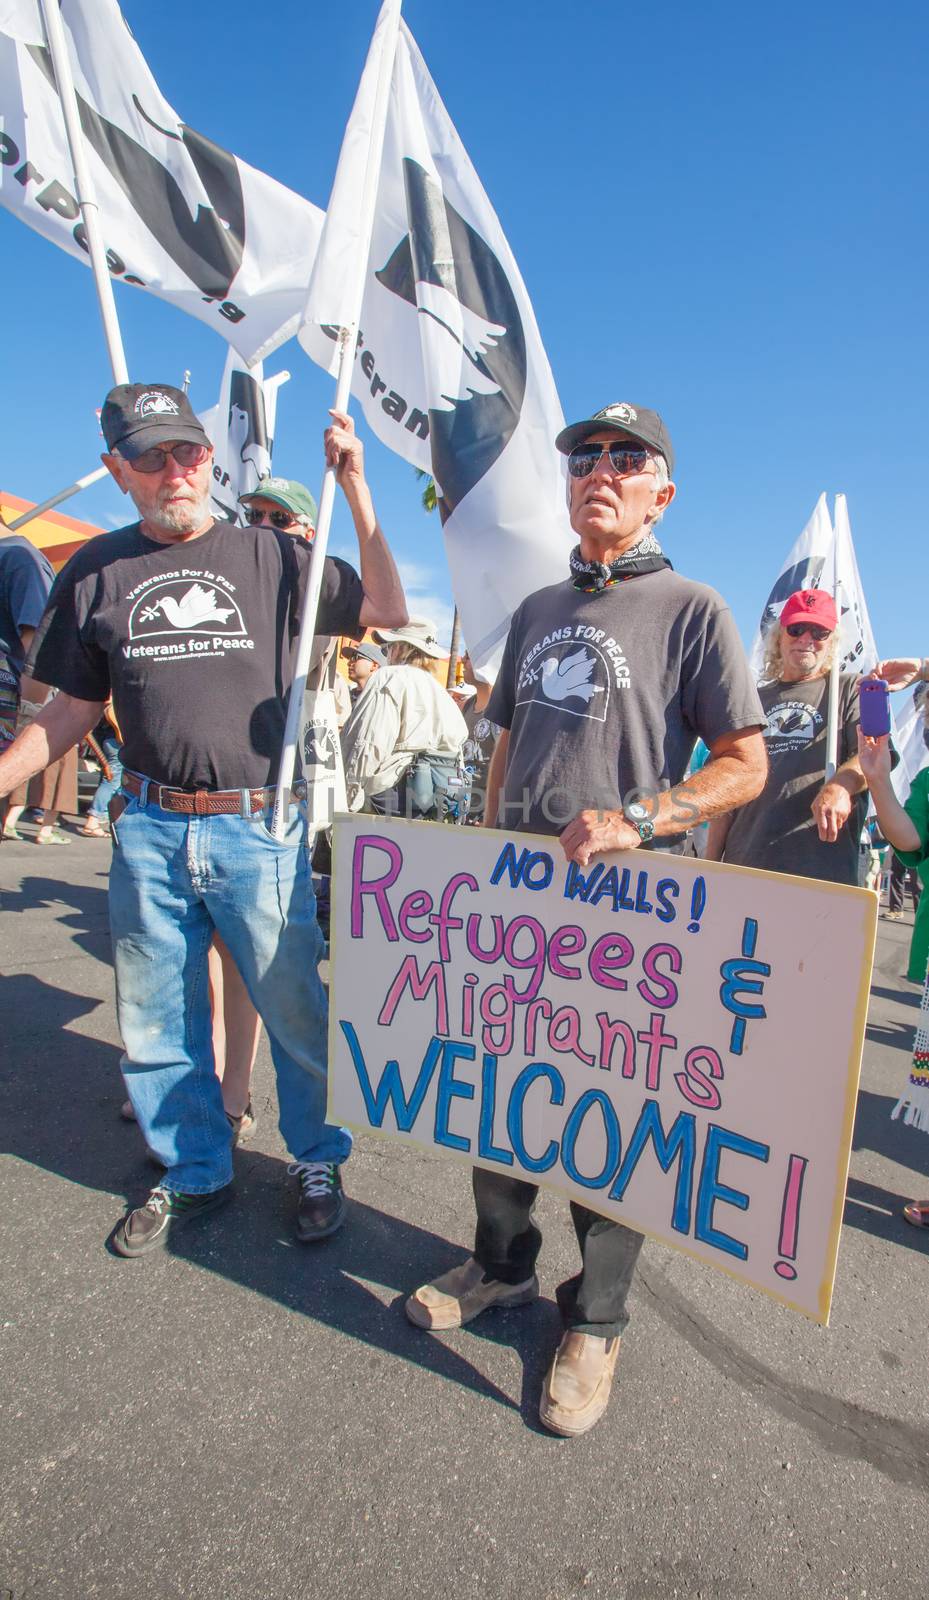 NOGALES, AZ - OCTOBER 08: Group of US war veterans with flags and signs at border policy protest march on October 08, 2016 in Nogales, AZ, USA.